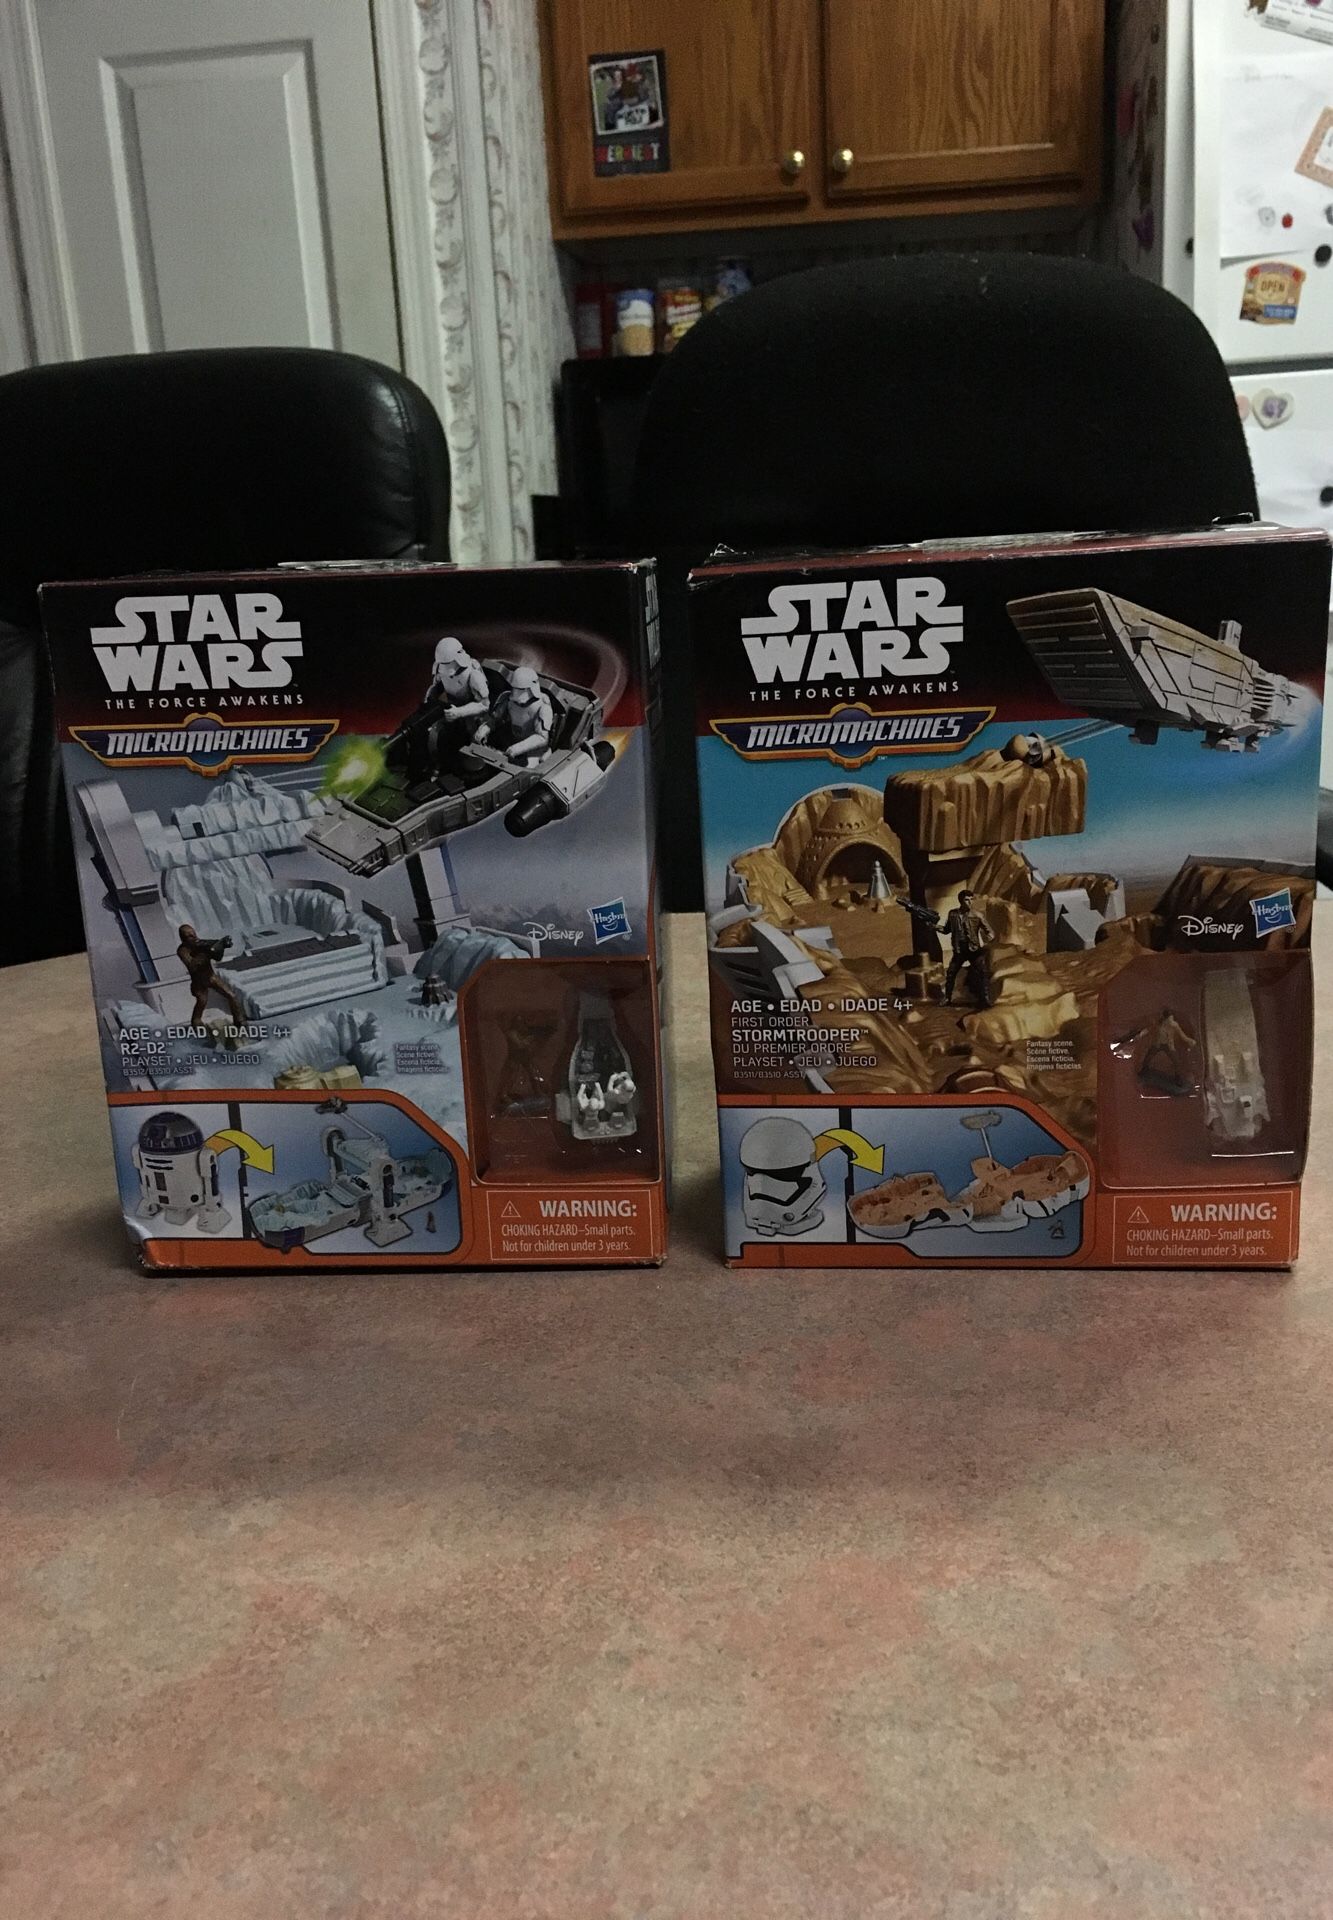 Two brand new Star Wars Micromachines,